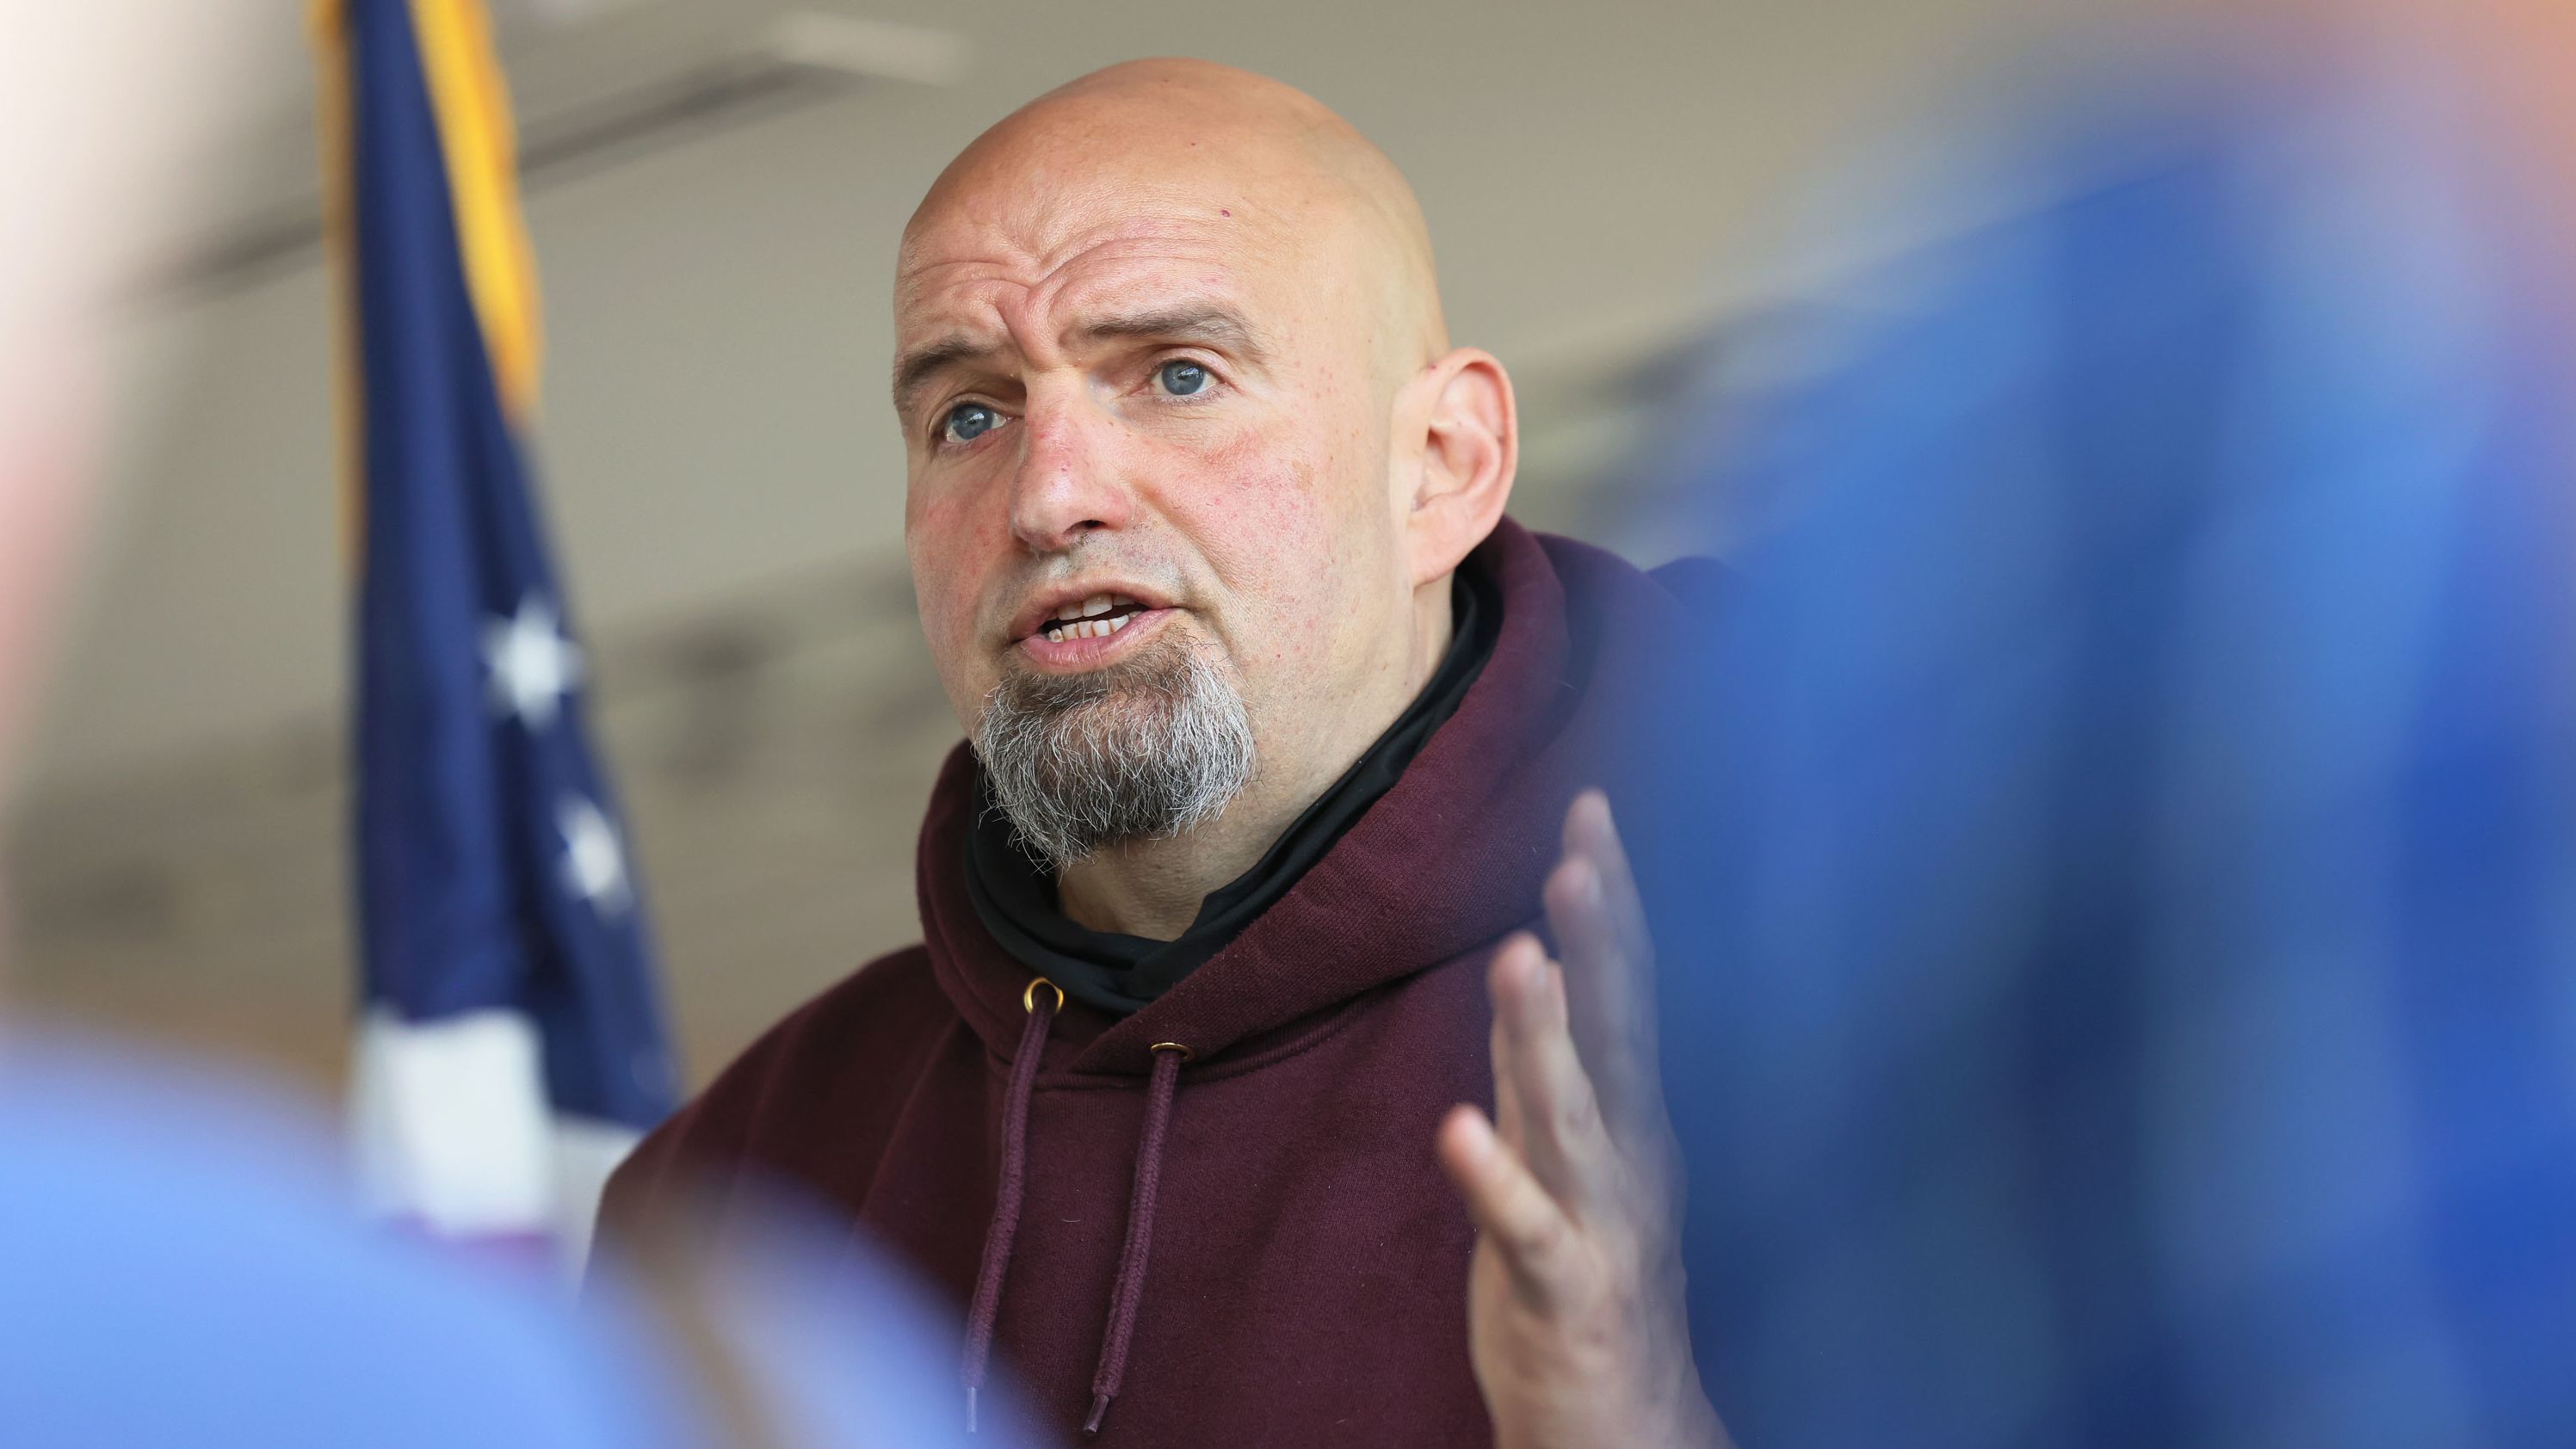 Pennsylvania Lt. Gov. John Fetterman campaigns for U.S. Senate at a meet and greet at Joseph A. Hardy Connellsville Airport on May 10, 2022 in Lemont Furnace, Pennsylvania.